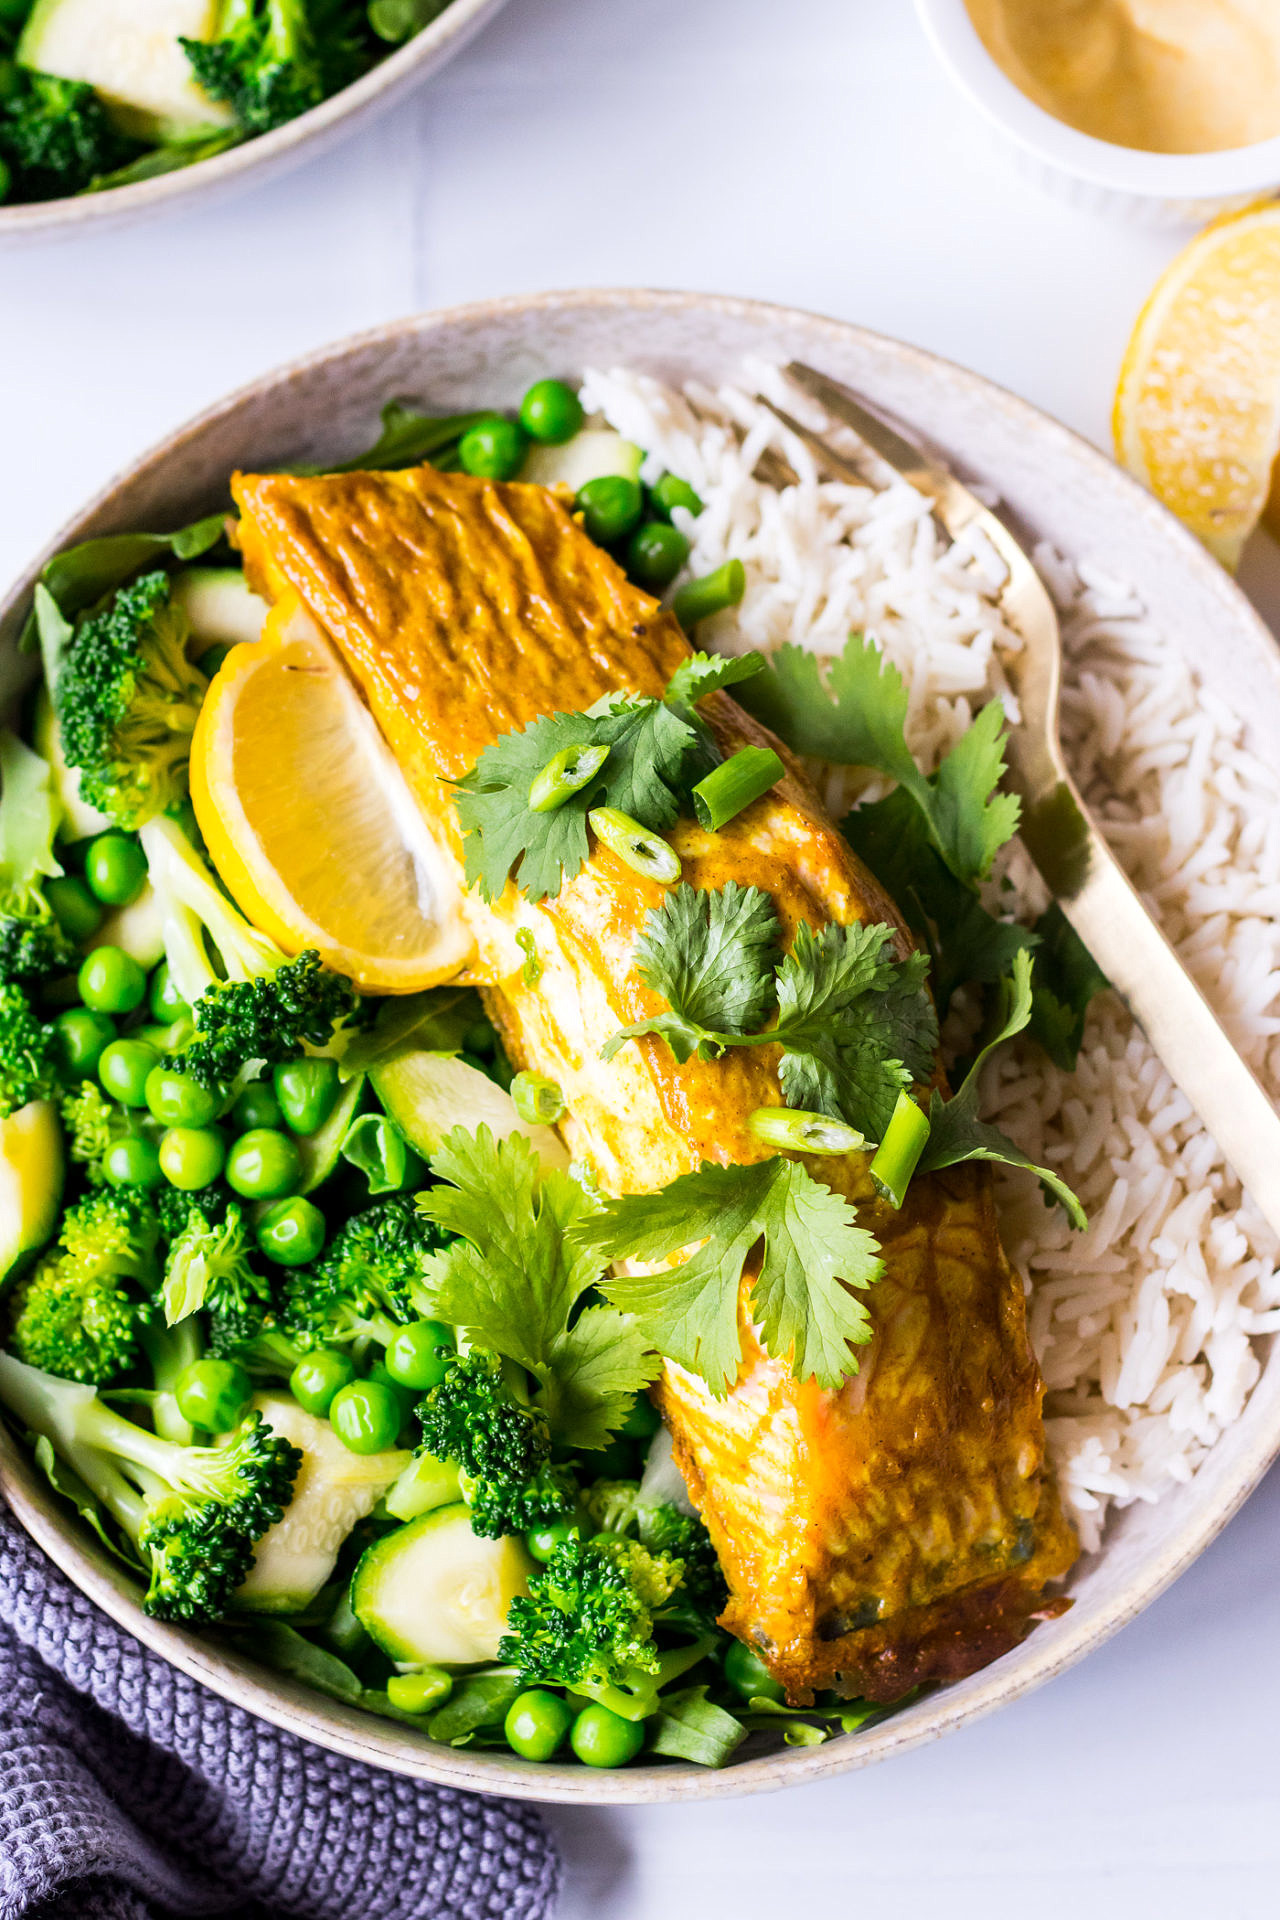 Baked salmon fillet rubbed with curry spice, in a bowl on top of white rice and green vegetables